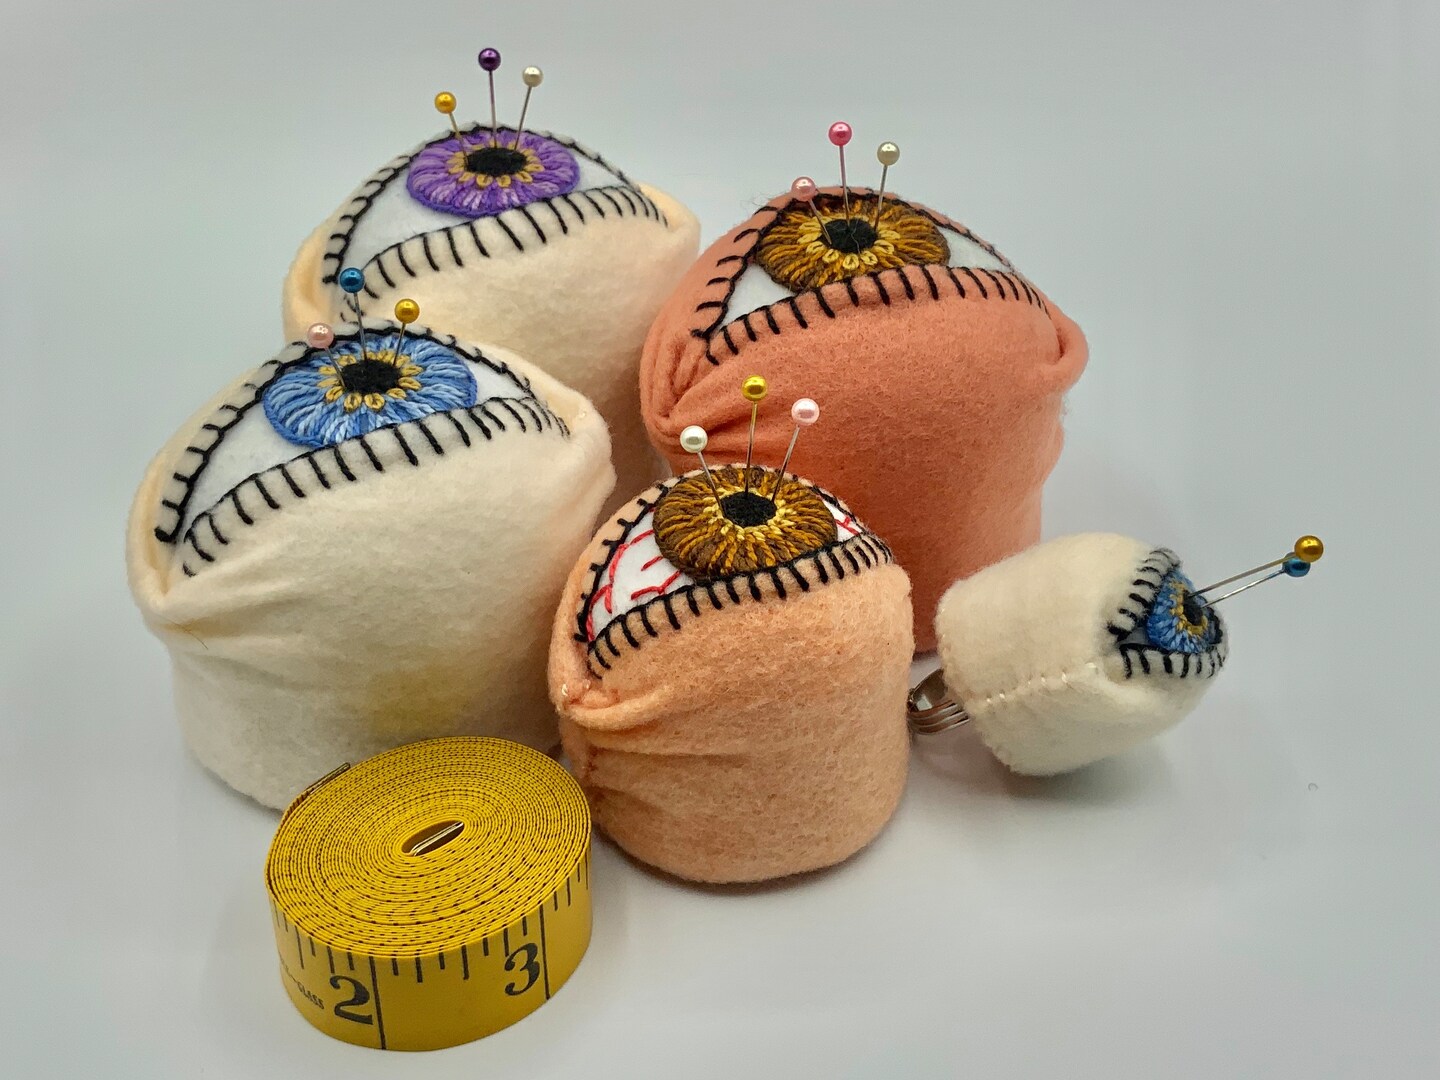 Made to order - The Original Eyeball Bottlecap Pincushion - choose S, M or  L - free usa ship creepy witchy anatomical voodoo zombie gross